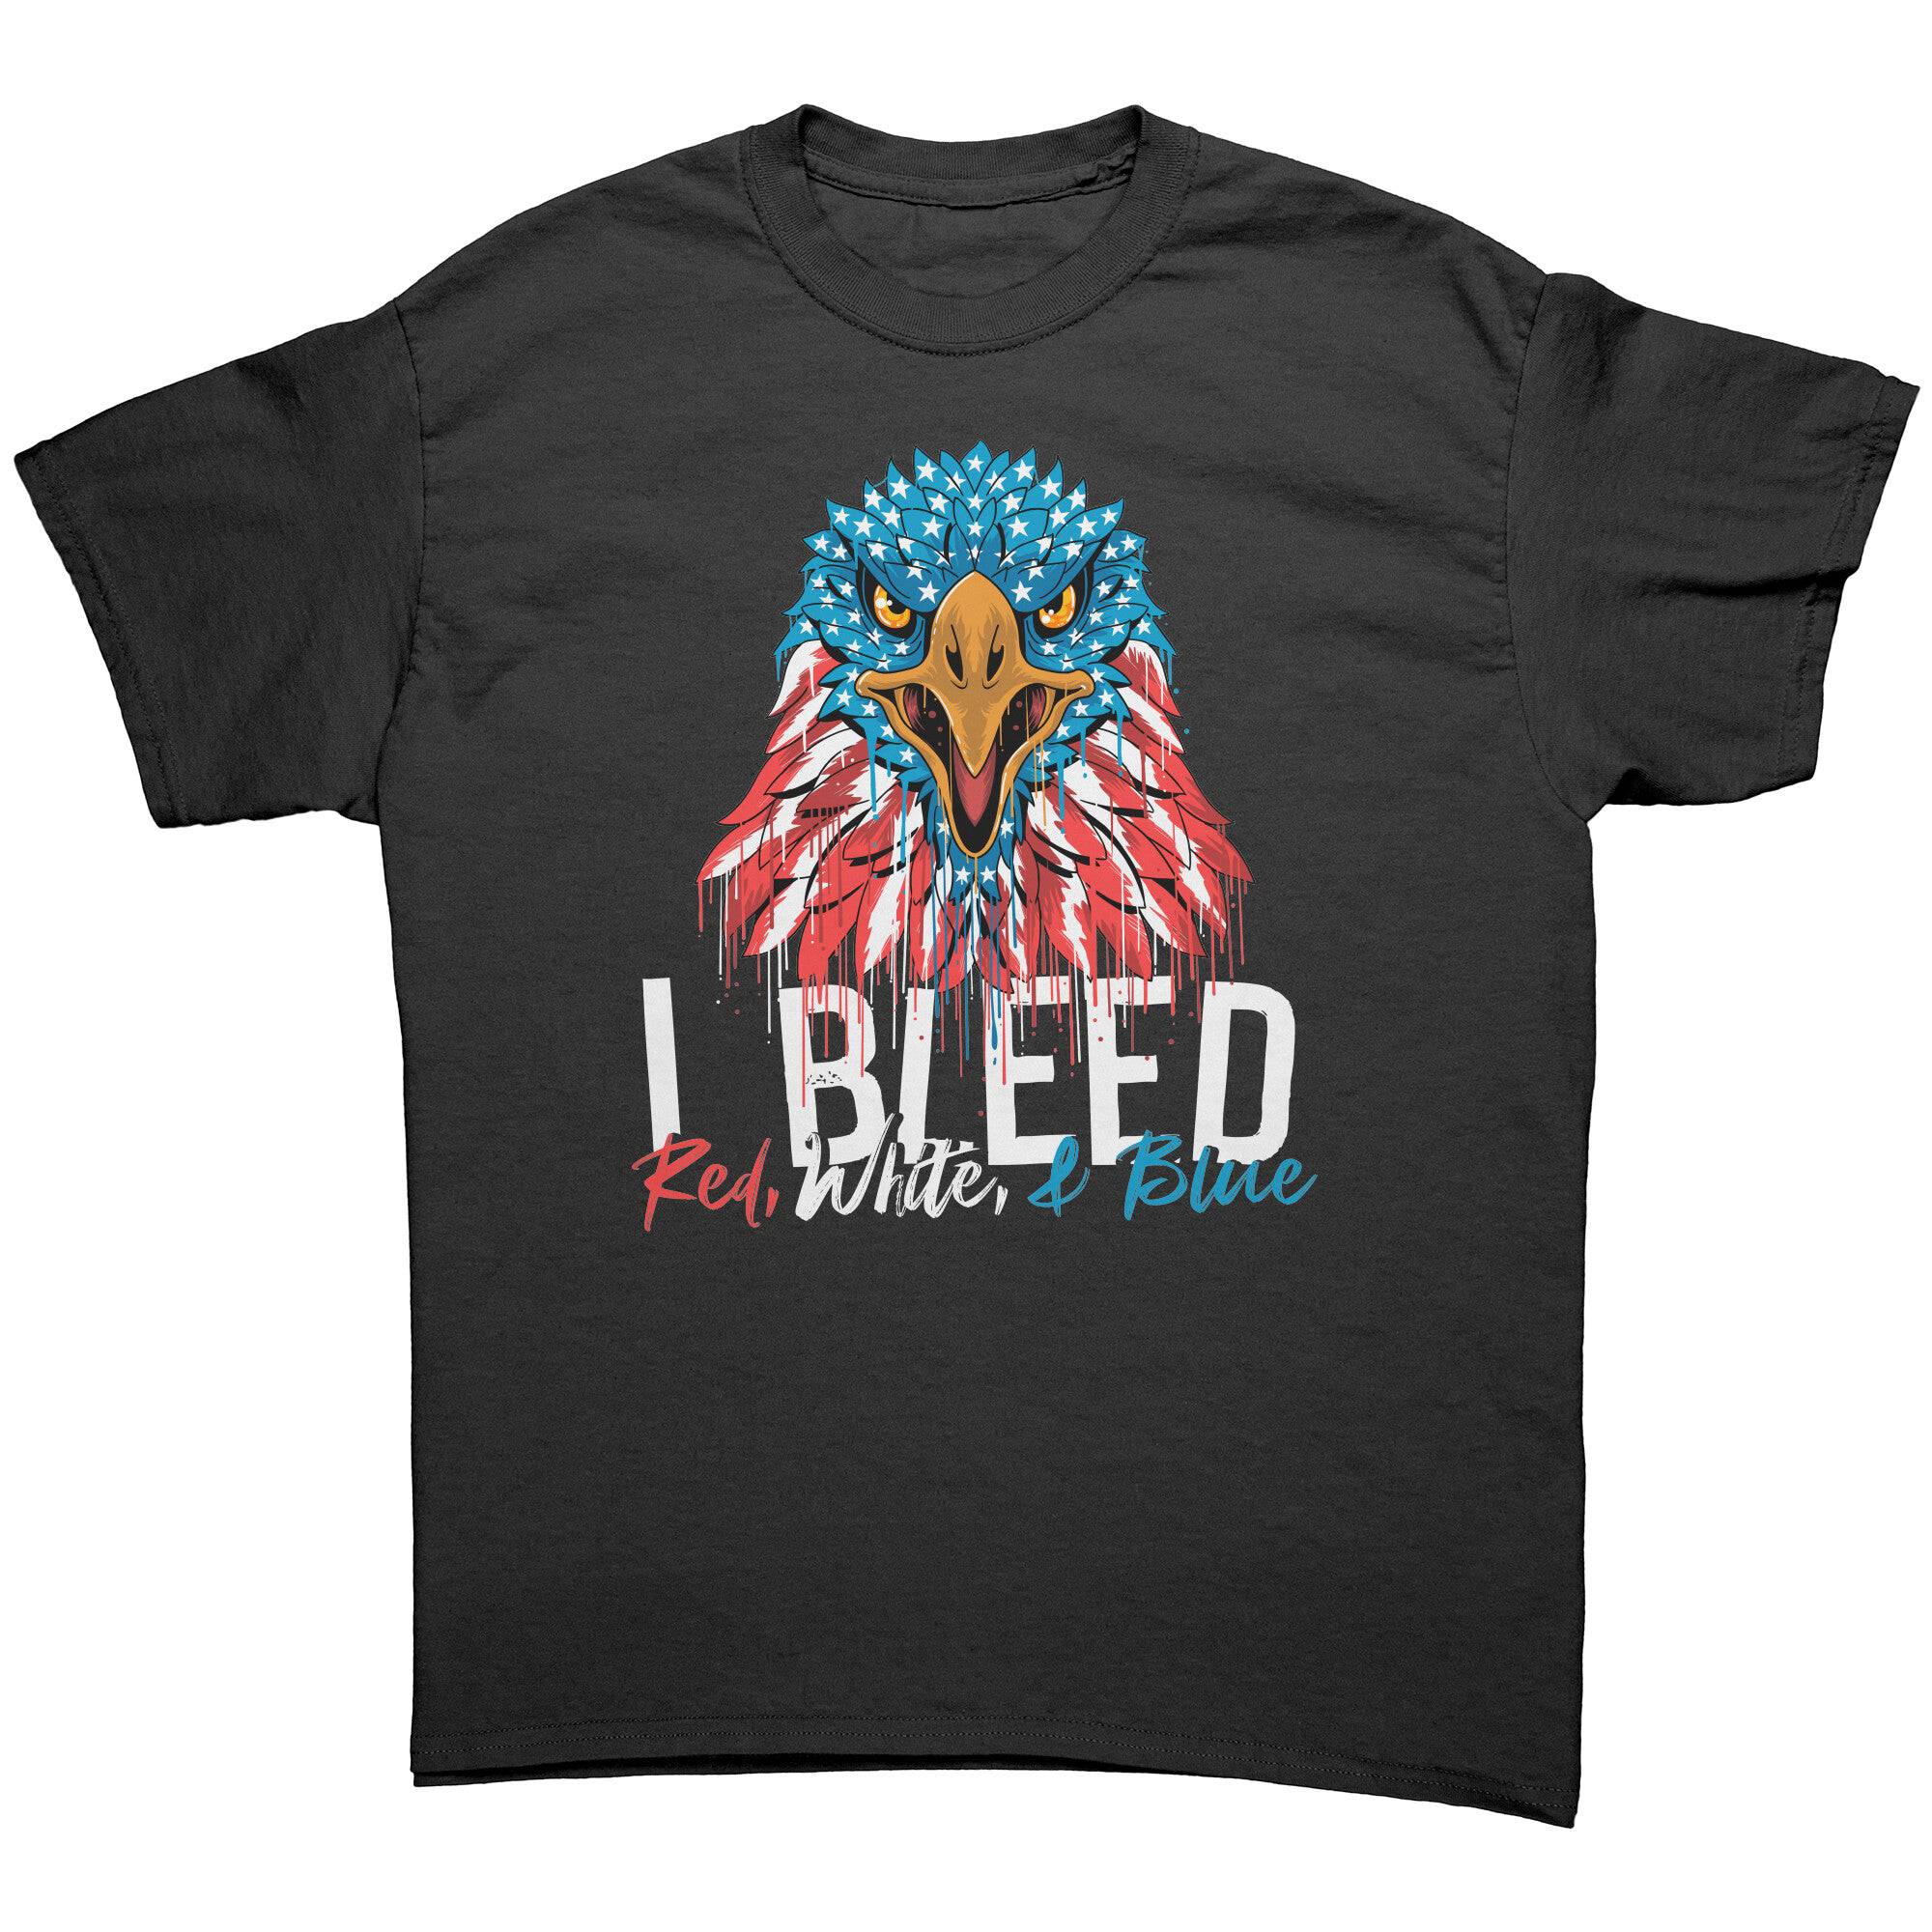 I Bleed Red, White, And Blue -Apparel | Drunk America 